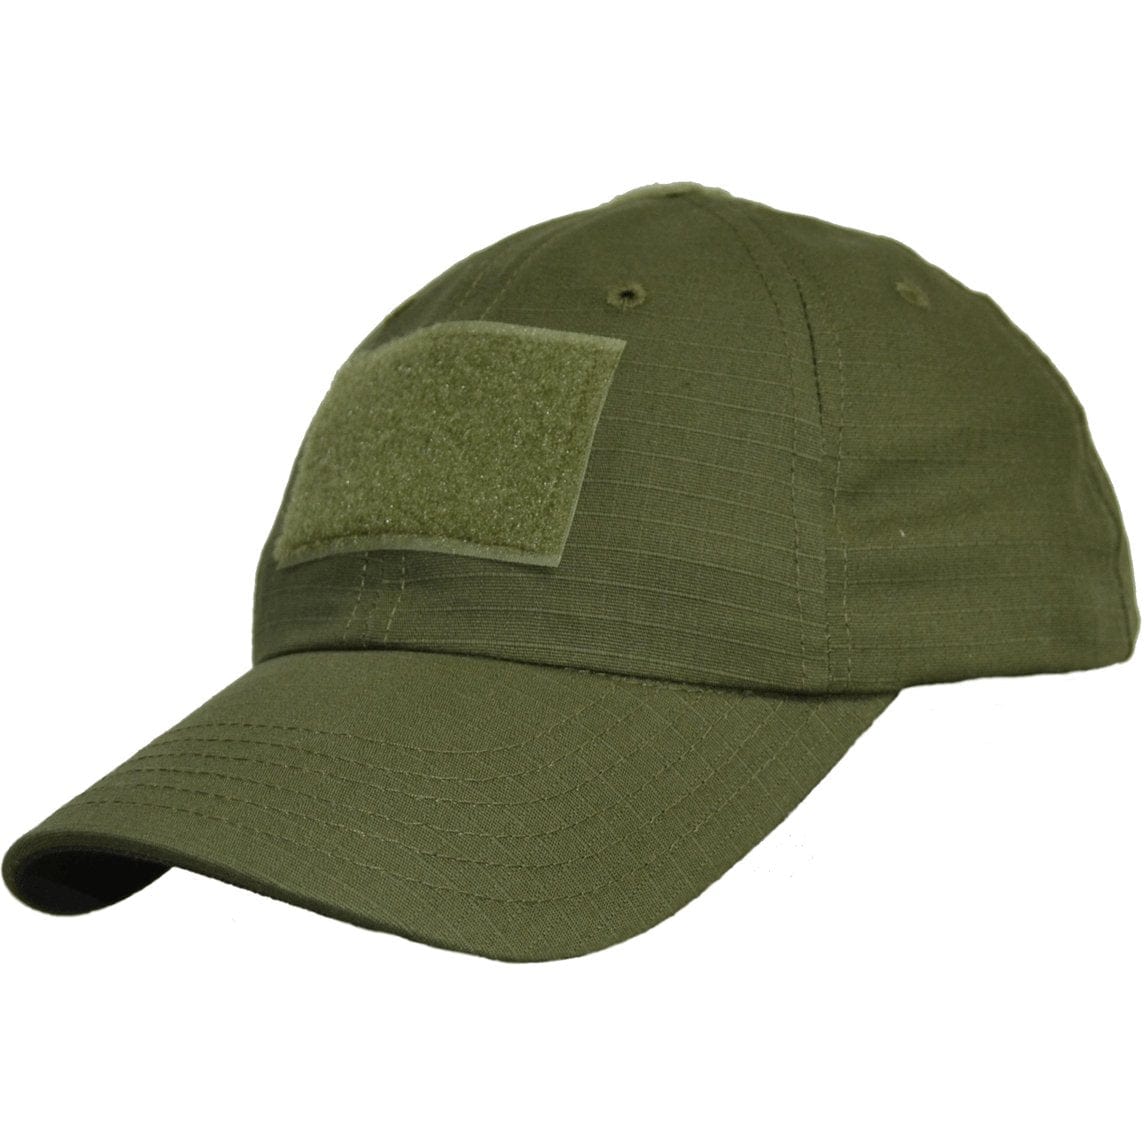 Tactical Gear Junkie Patches TGJ US Made Tactical Operator Hat - Solid Back with Custom 1x3.75 Patch